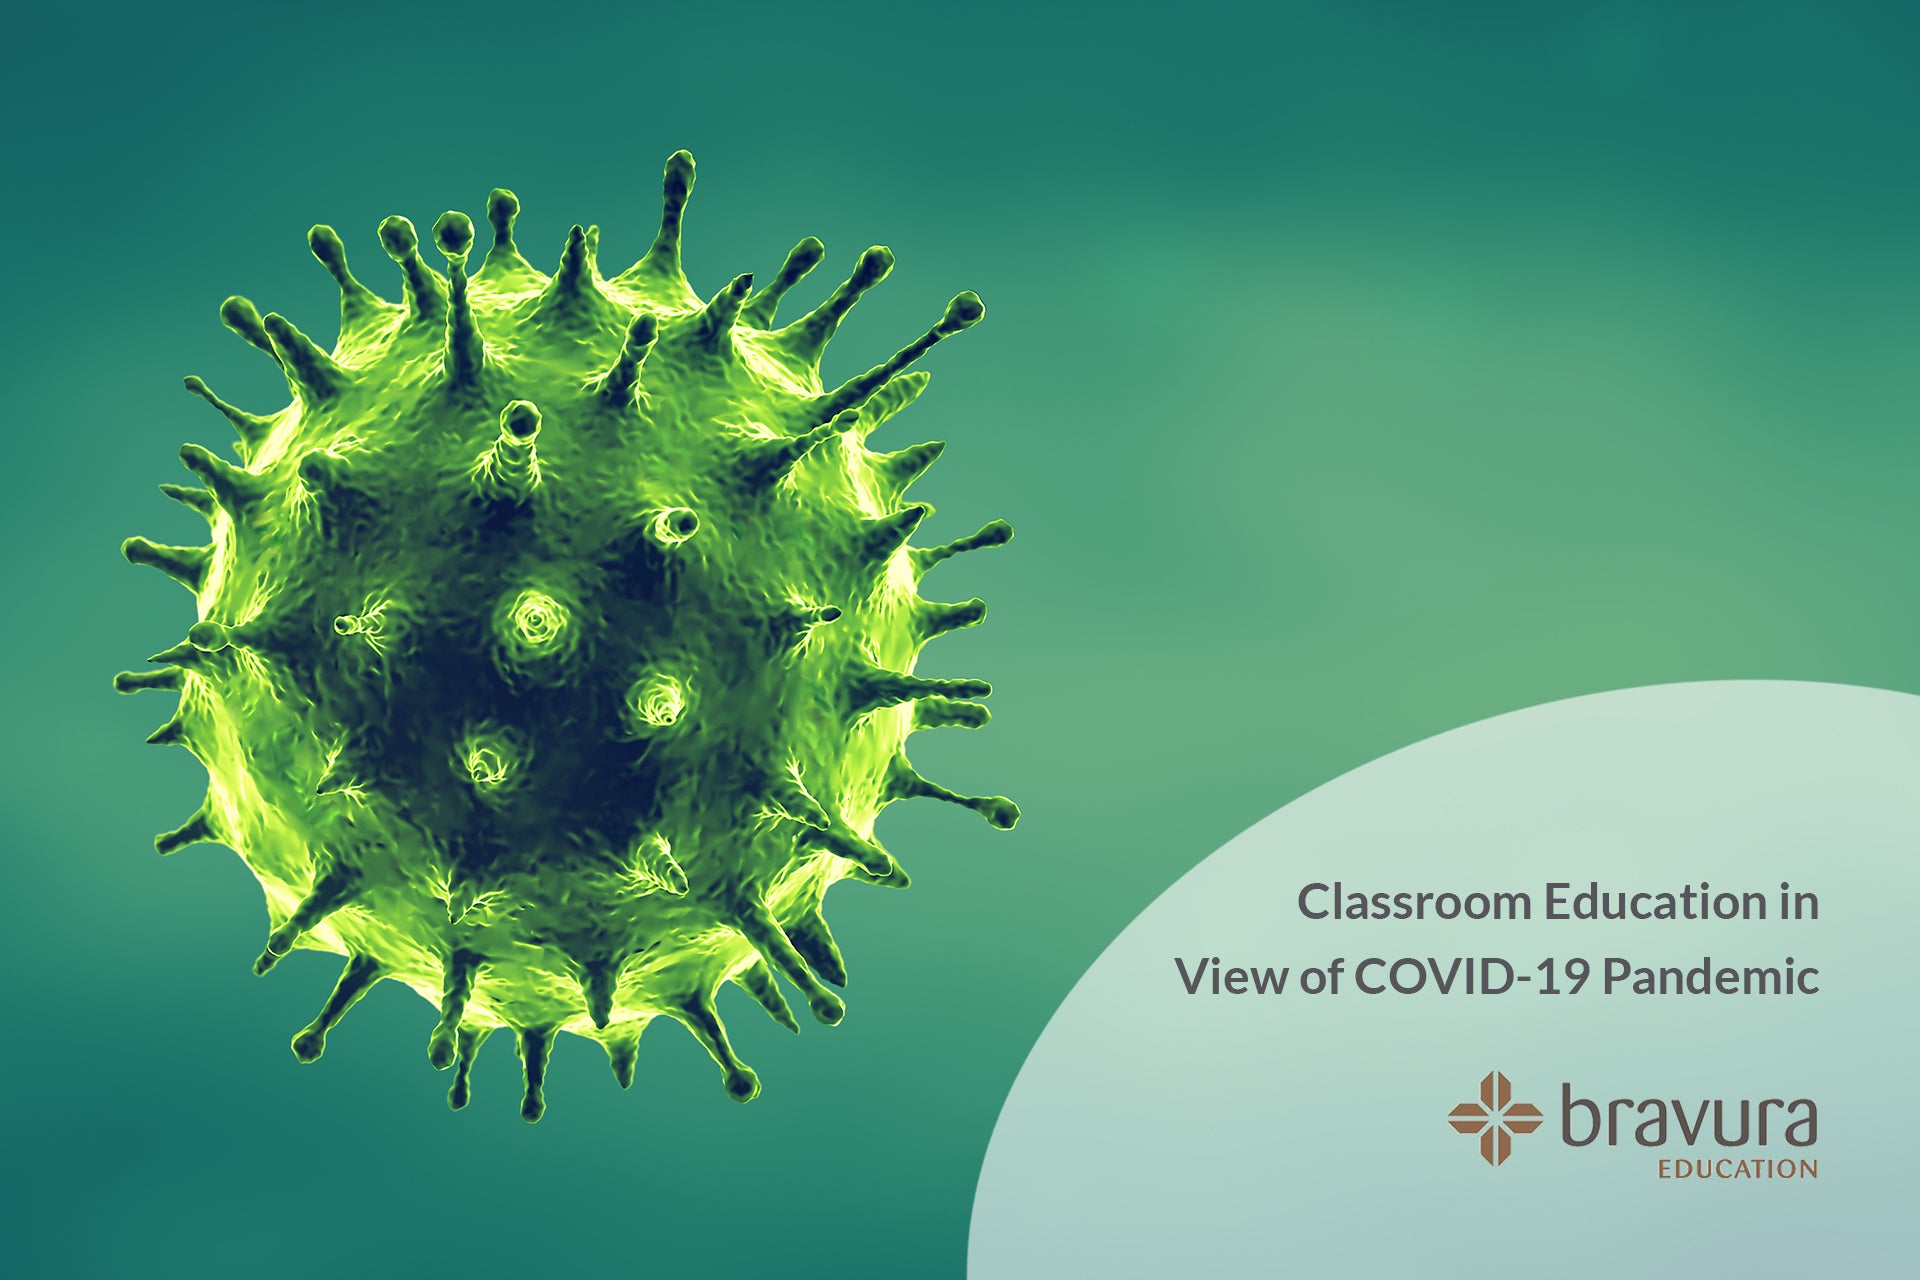 Classroom Education in View of COVID-19 Pandemic